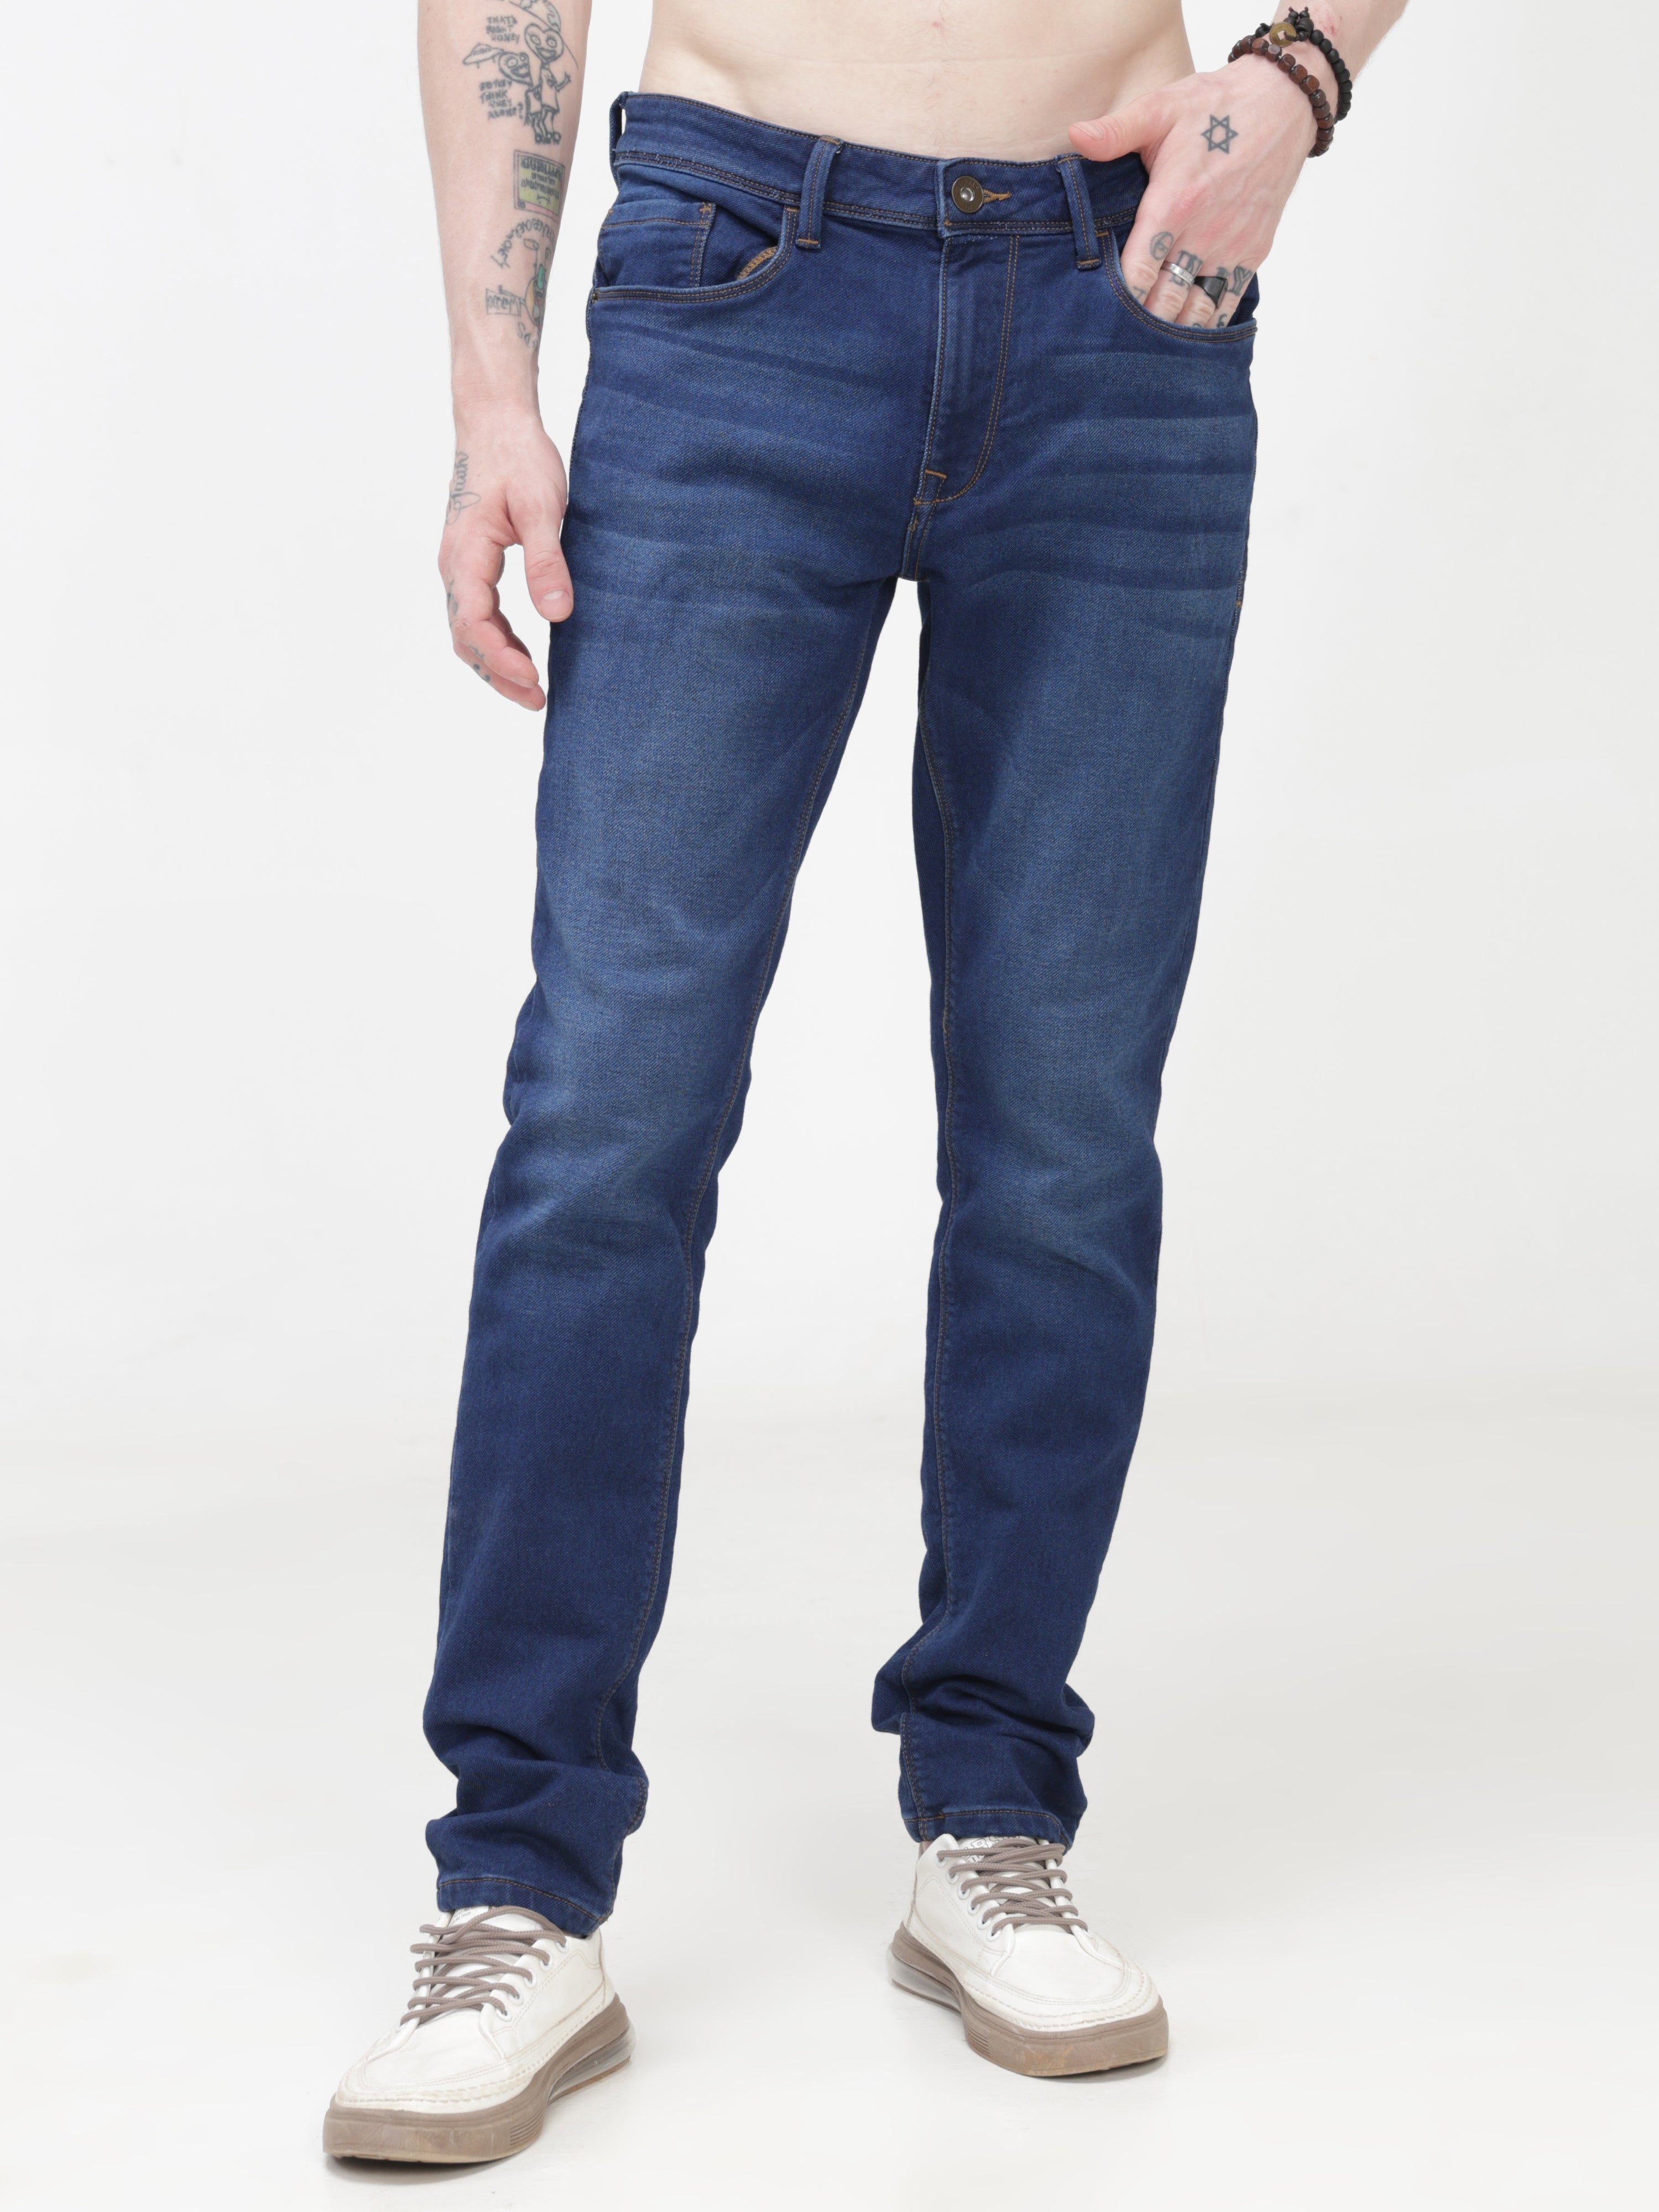 URturms Discover Turms Wanderlust jeans, the 30 days no wash, anti-stain, anti-odor, and itch-free travel wear perfect for everyday. Tailored fit and mid-rise for ultimate comfort. Rs. 2999.00